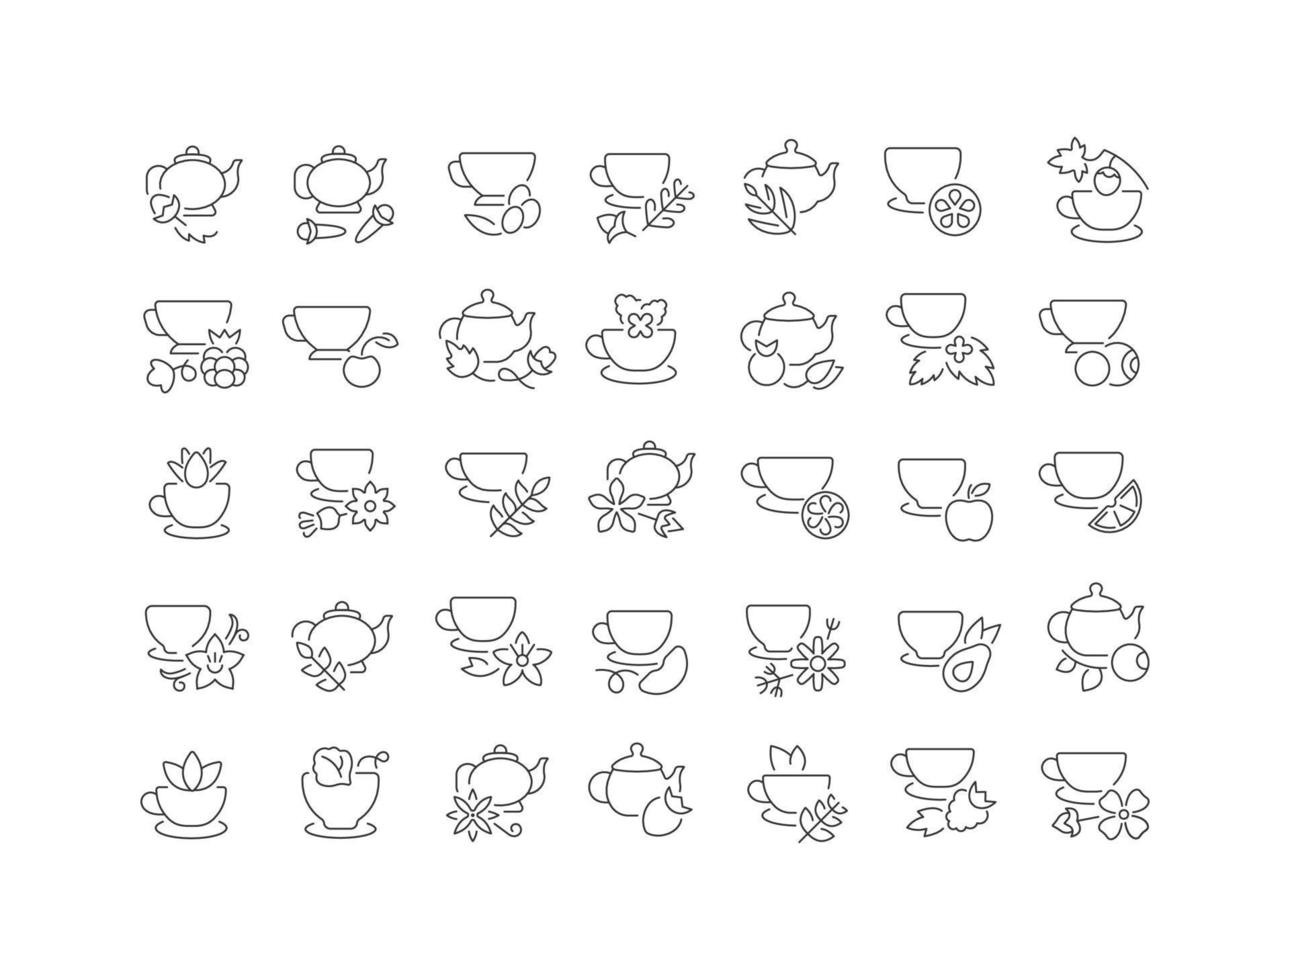 Set of linear icons of Types of Tea vector